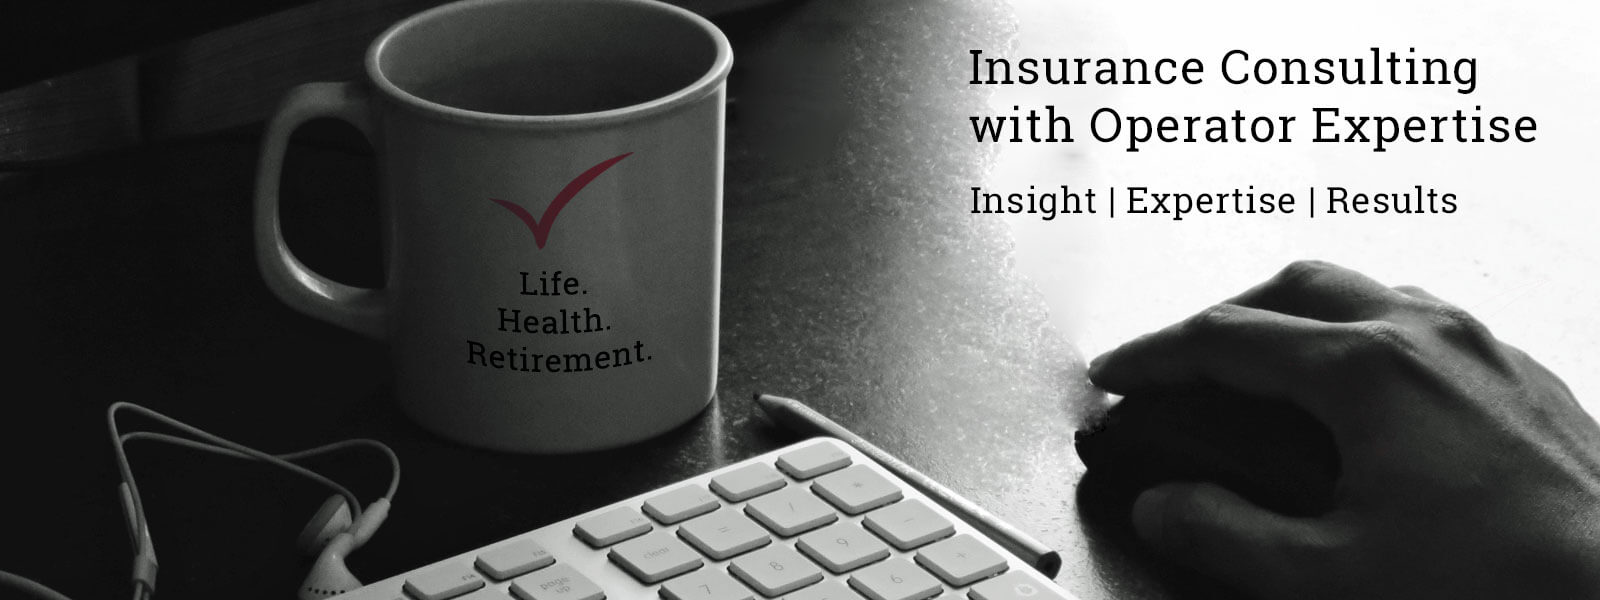 Insurance Consulting with Operator Expertise. Insight | Expertise | Results.